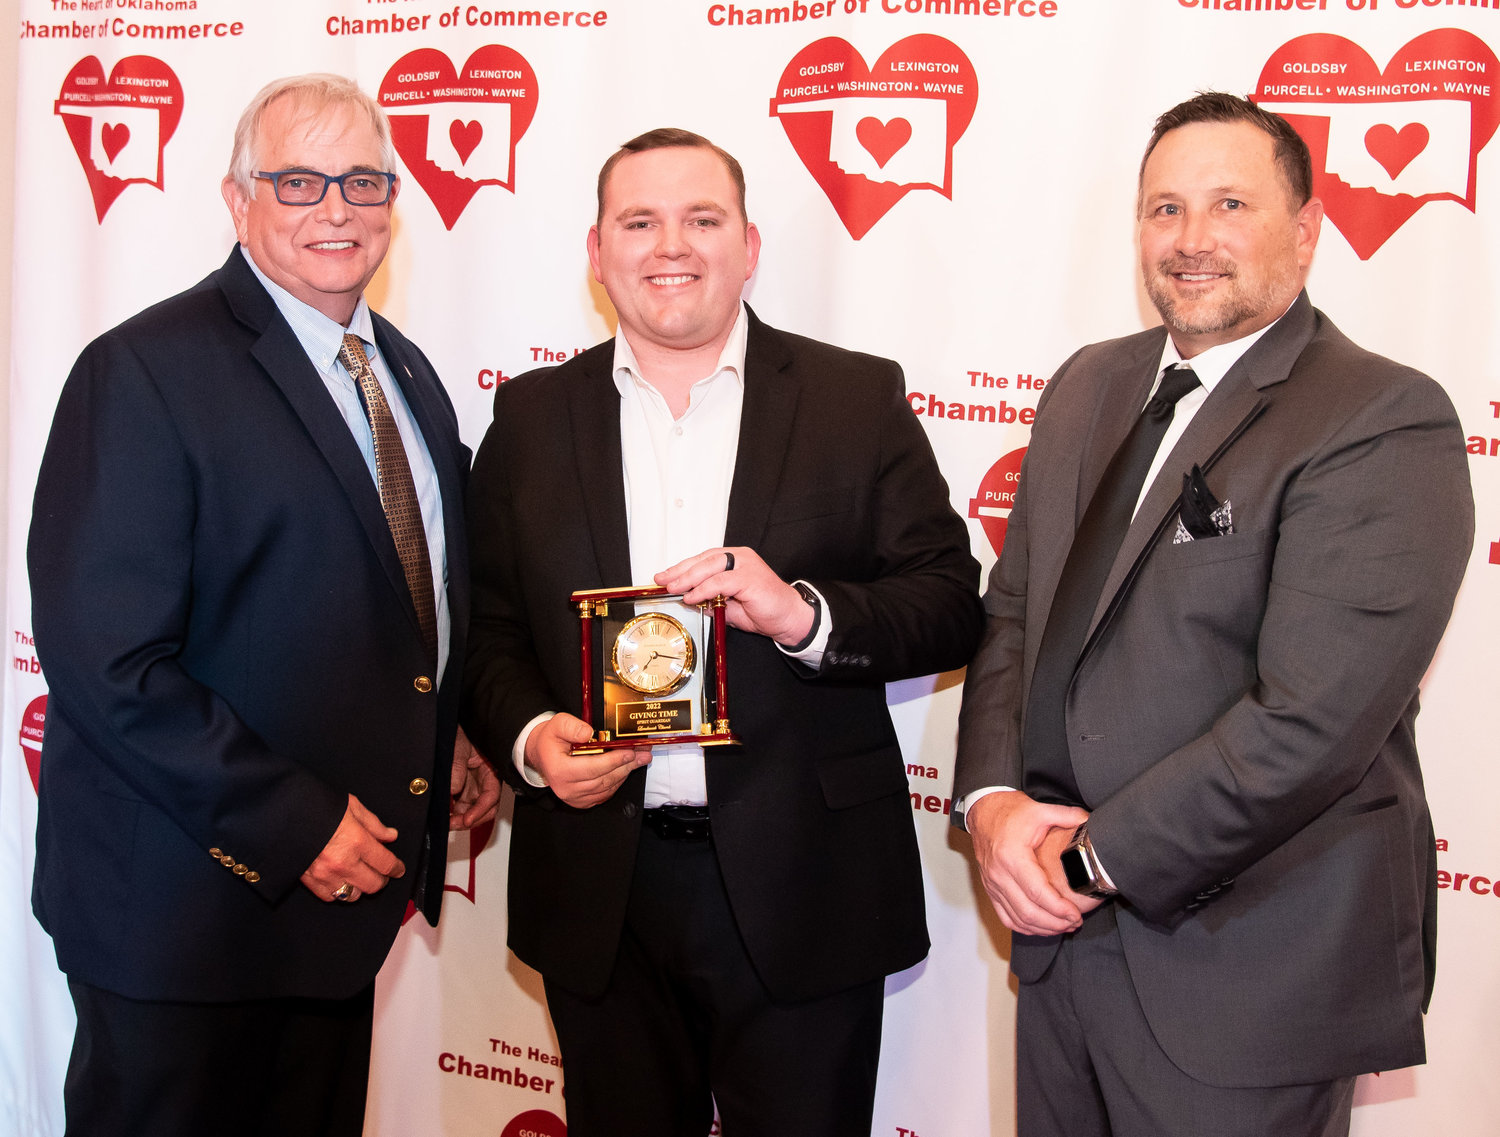 Landmark Church, represented by Ethan Sellers, was honored at the chamber banquet as the Spirit Guardian Award winner. City Manager Dale Bunn and Chamber President Chris Goldsby made the presentation. The Spirit Guardian Award is given annually to a person or organization who demonstrates distinguished human services.